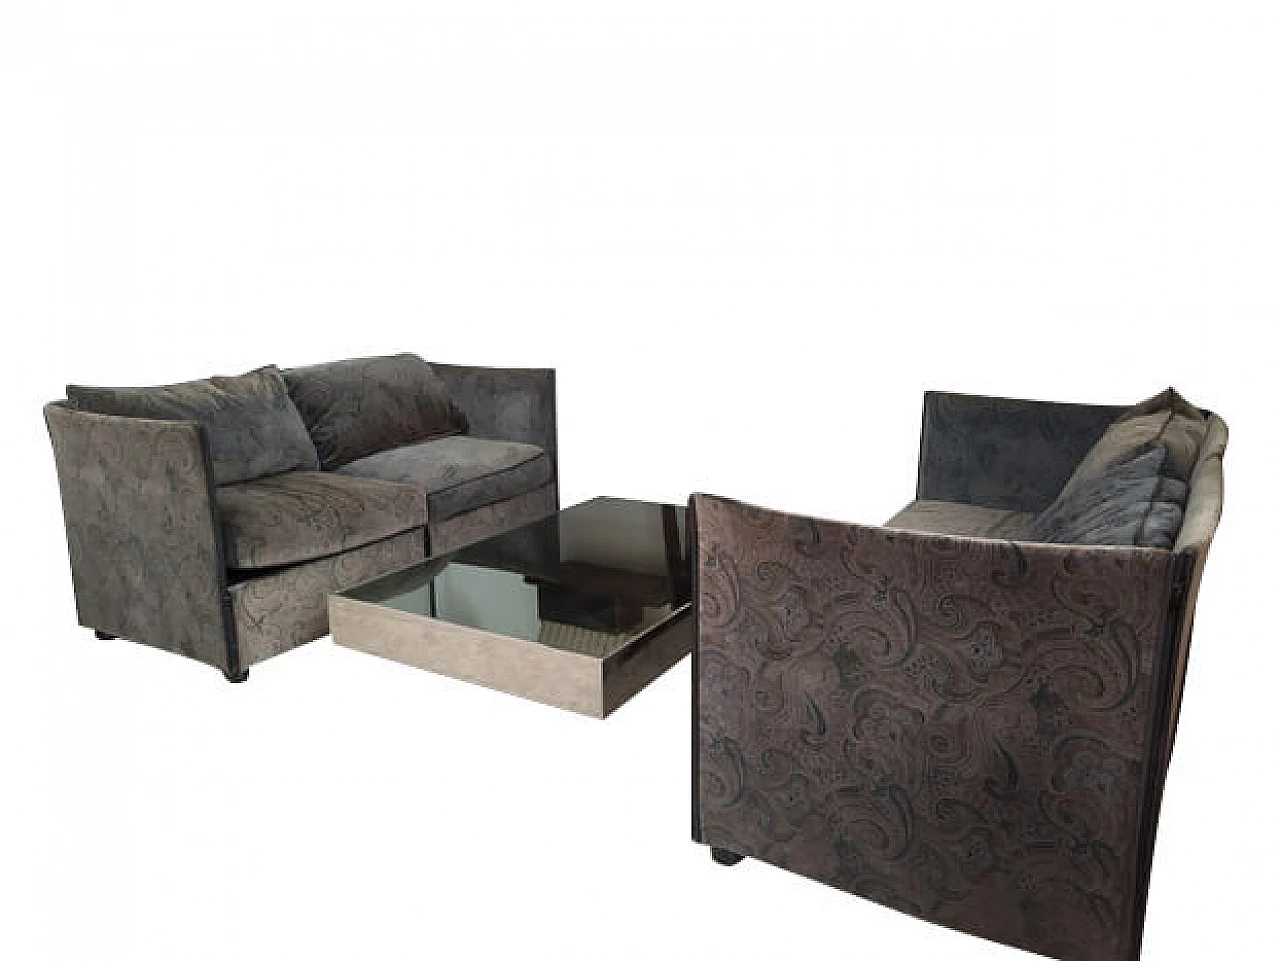 Char-a-Bank sofas by Mario Bellini for Cassina 1102407